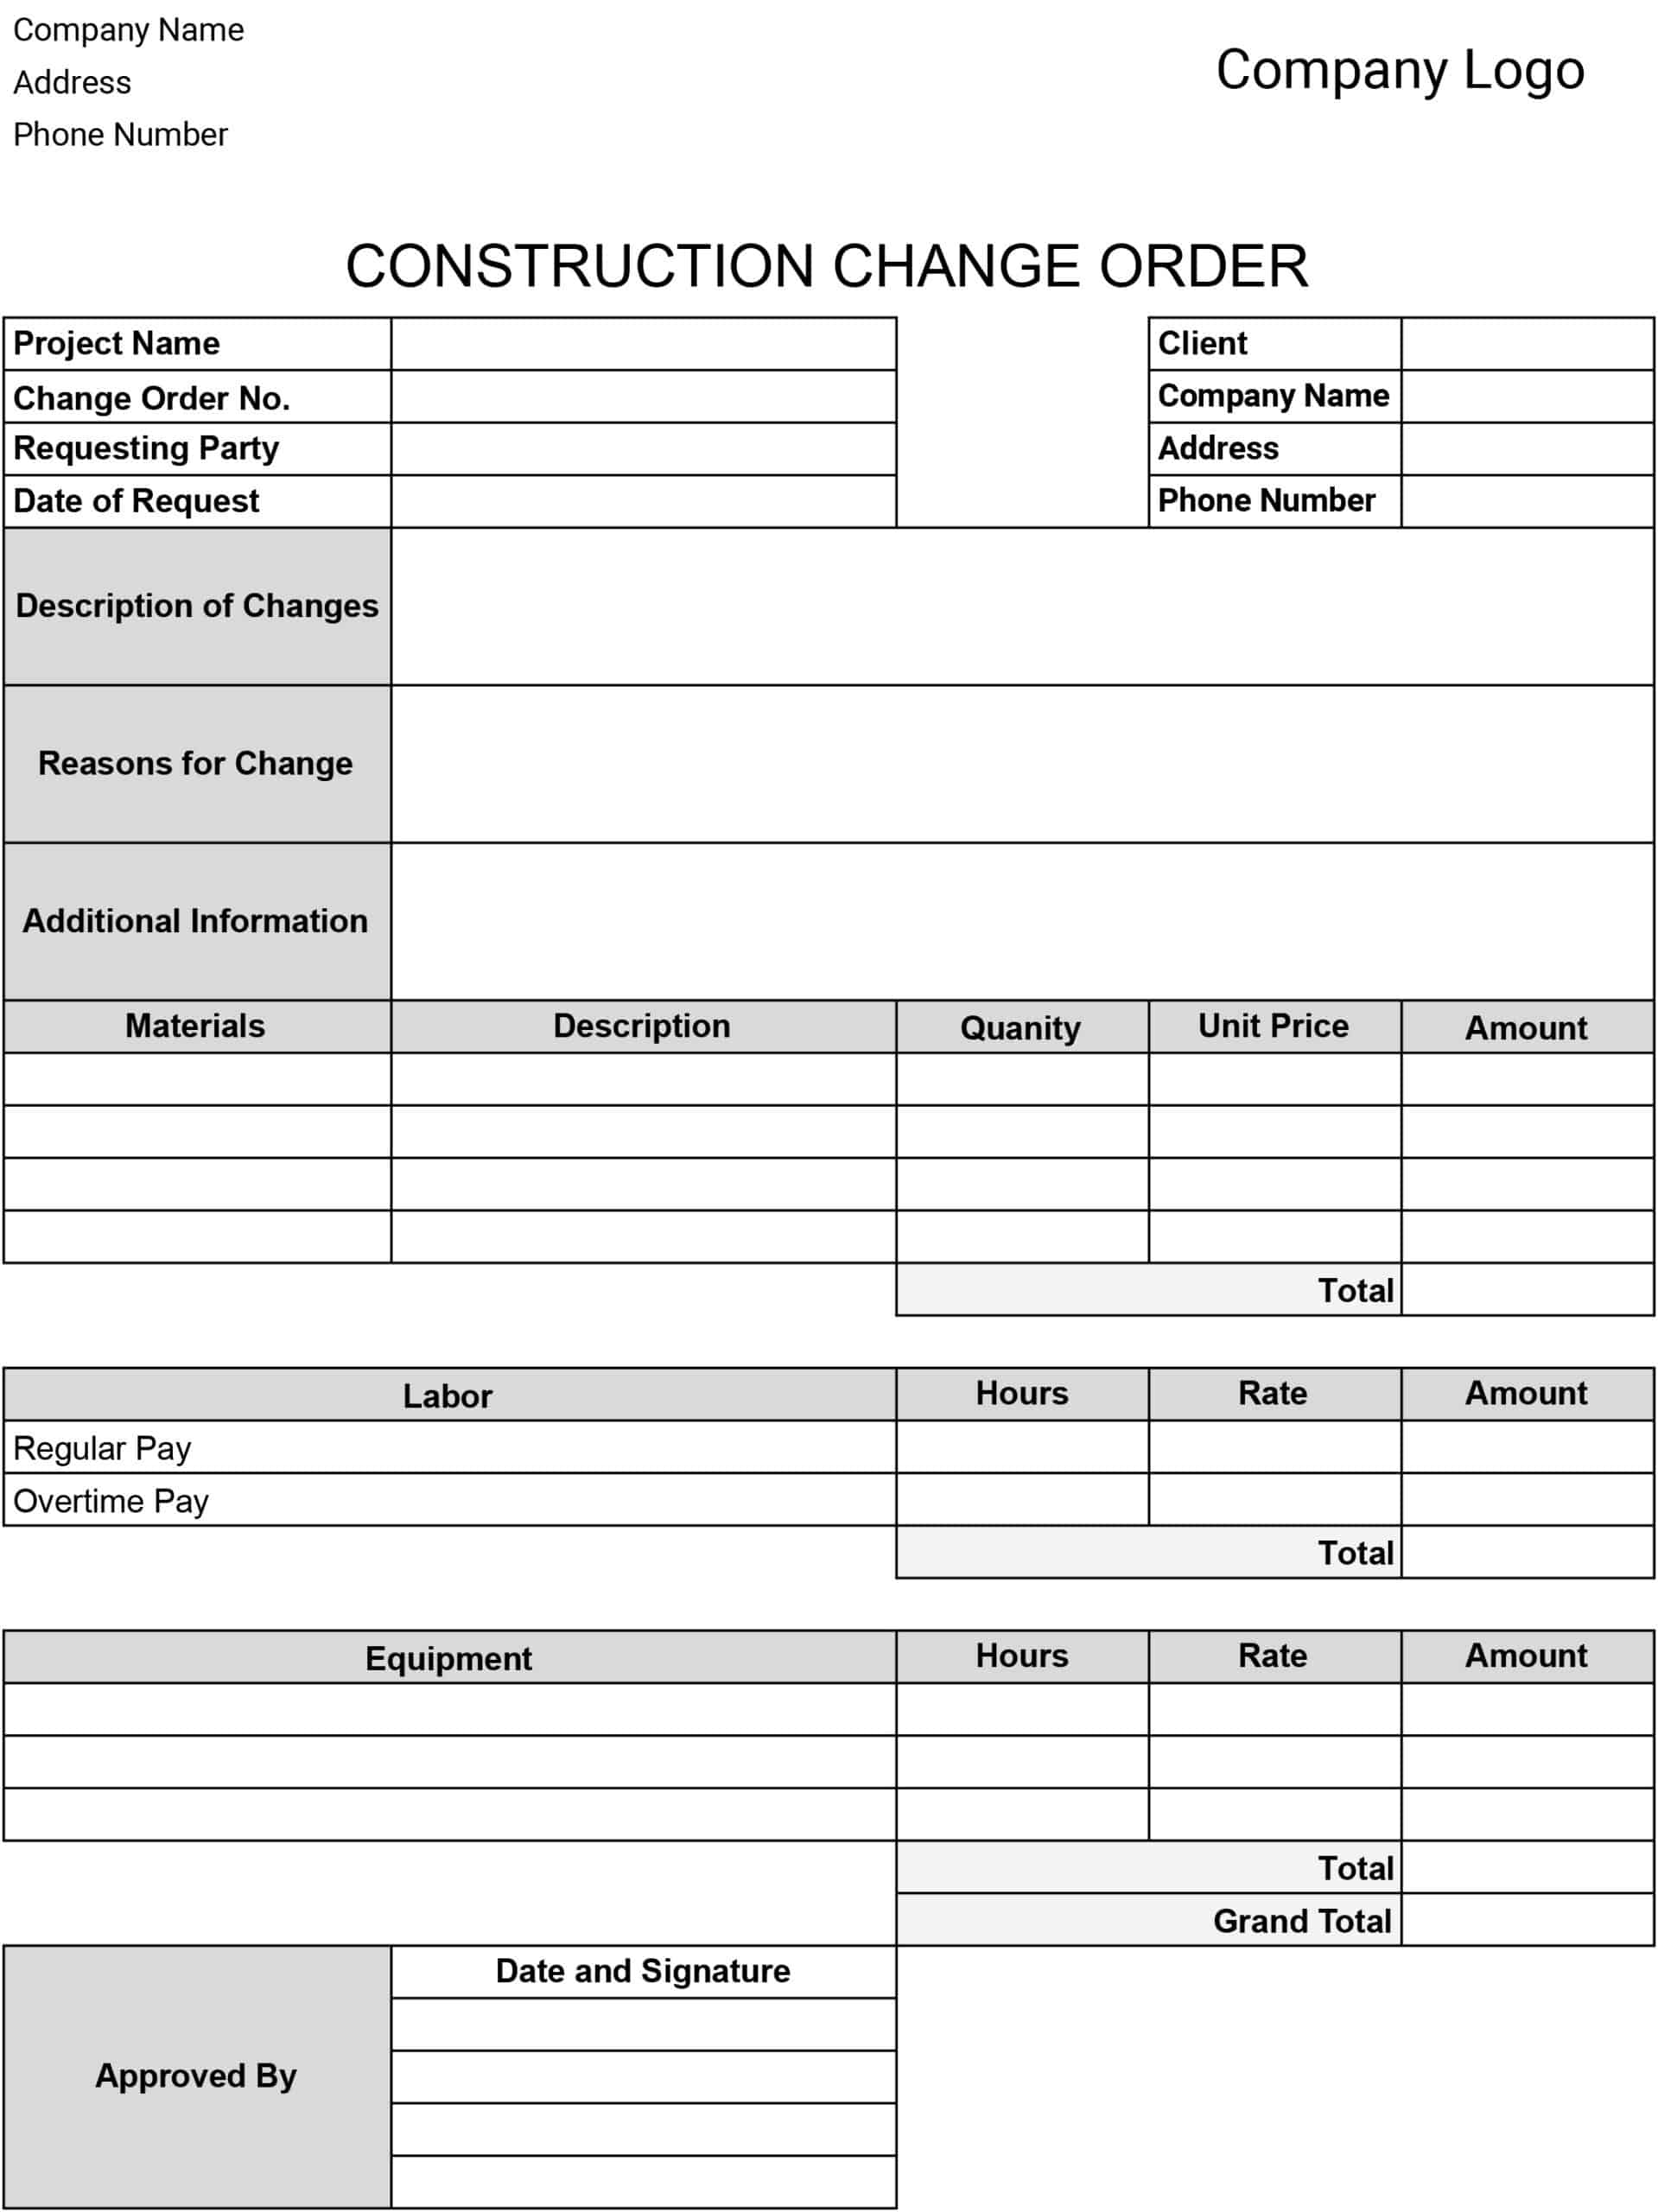 Change Order Templates: Download Print for Free